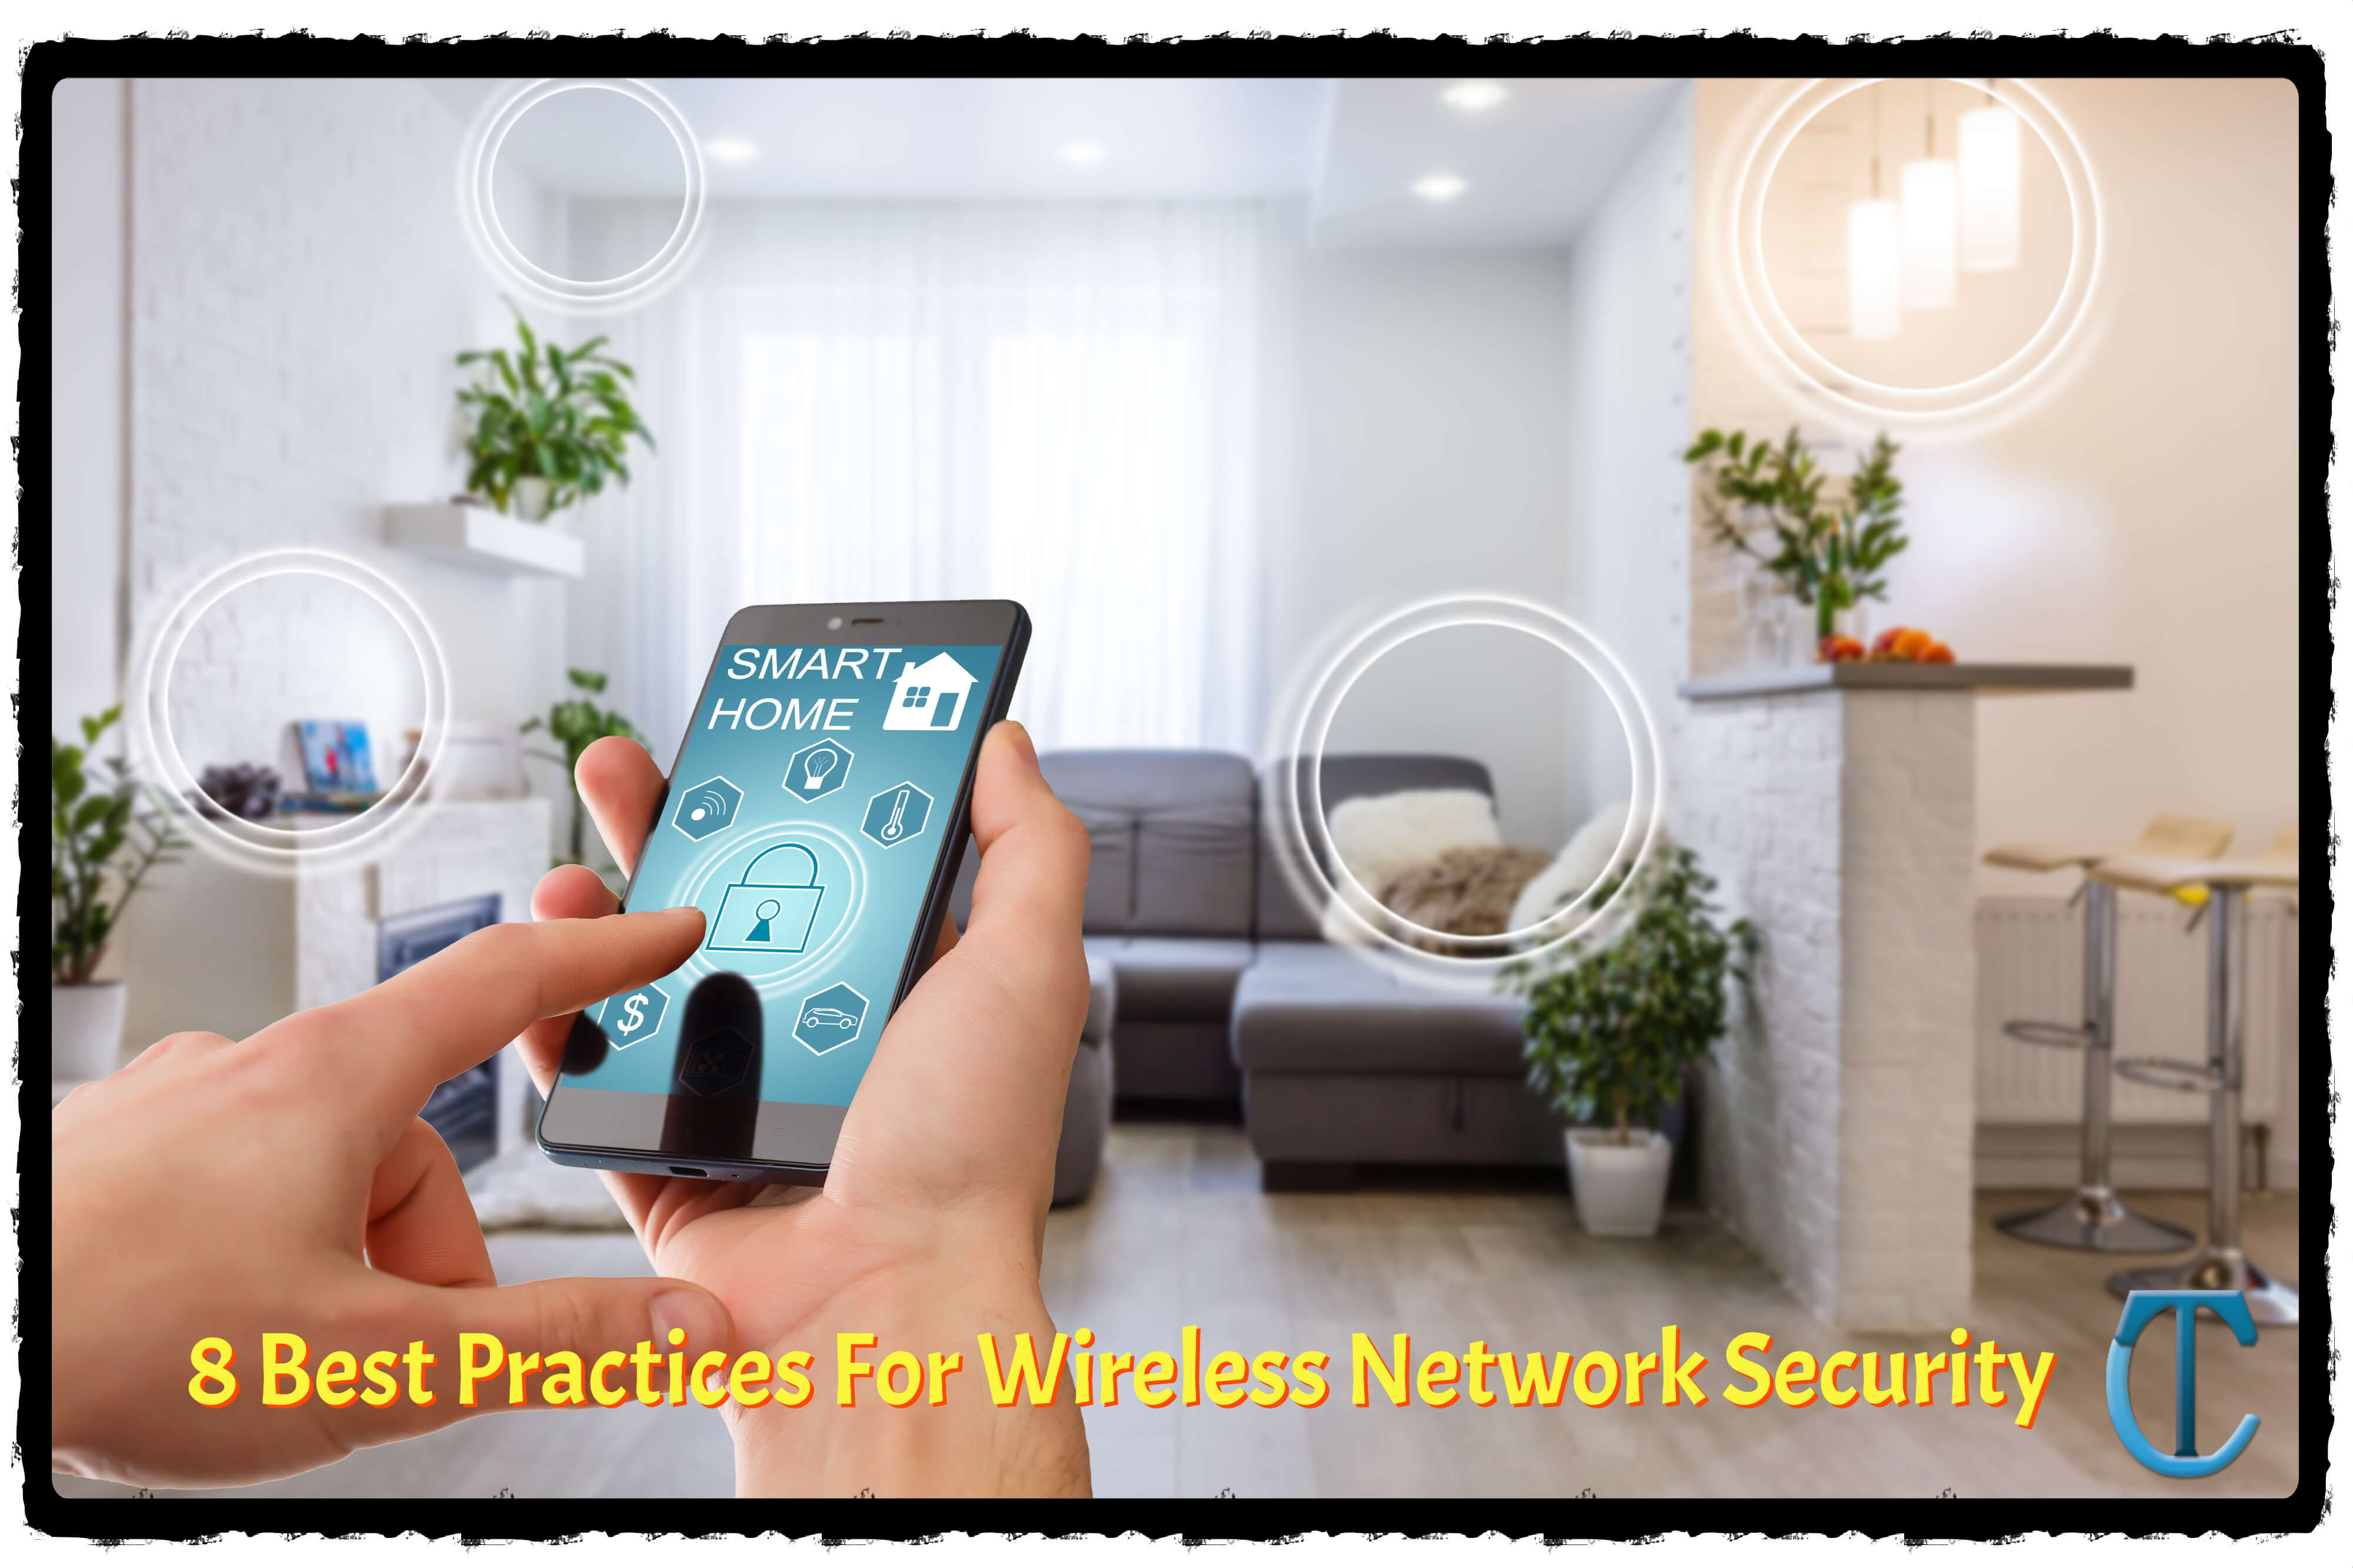 8 Best Practices For Wireless Network Security